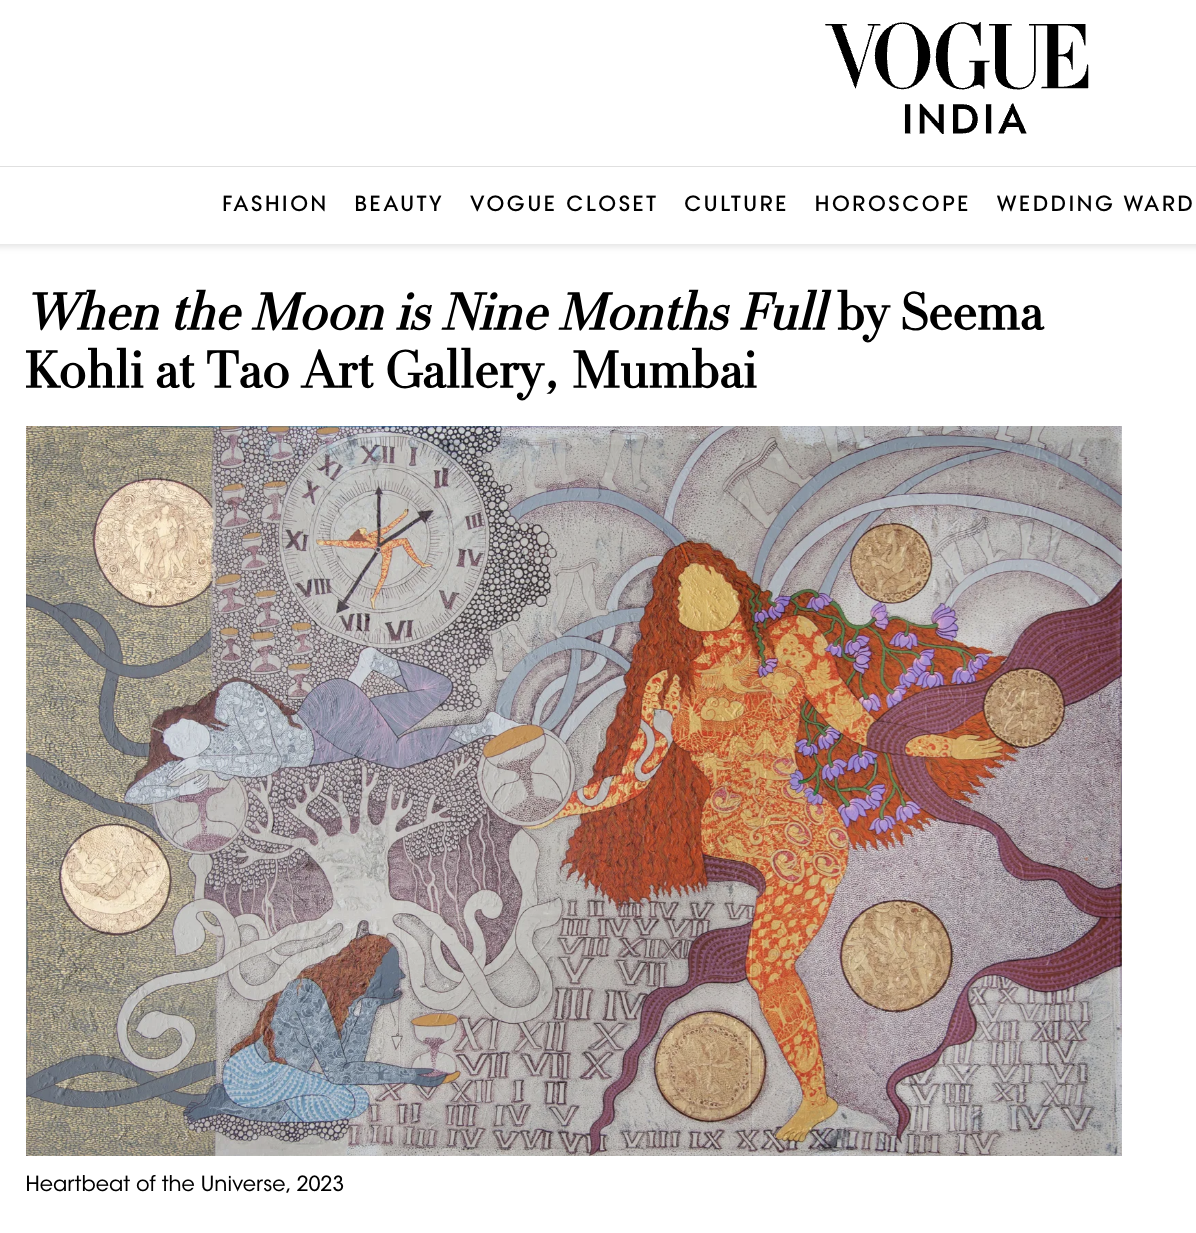 When the Moon is Nine Months Full - Vogue